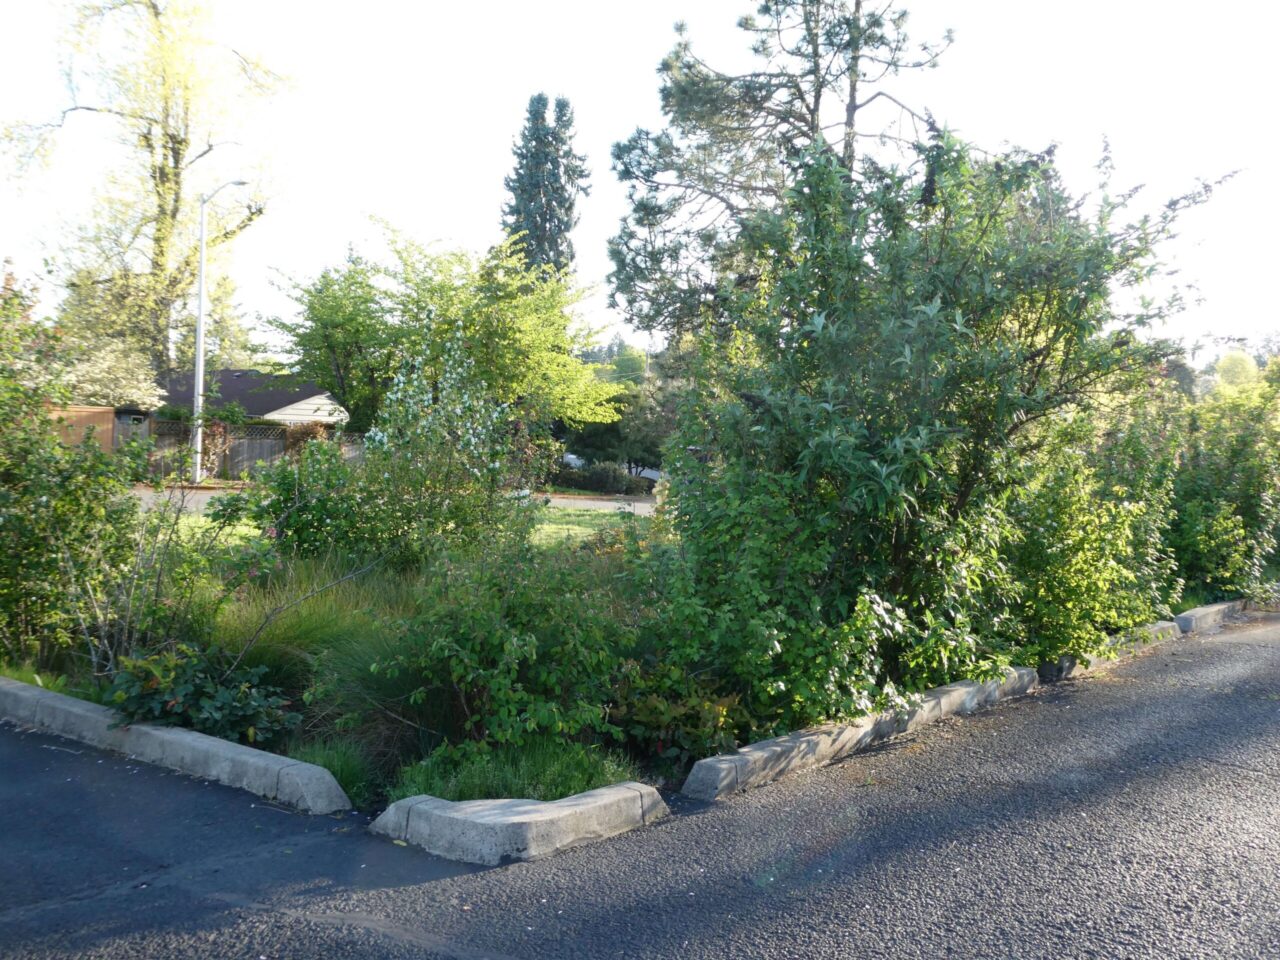 5 years later bioswale site full of plants